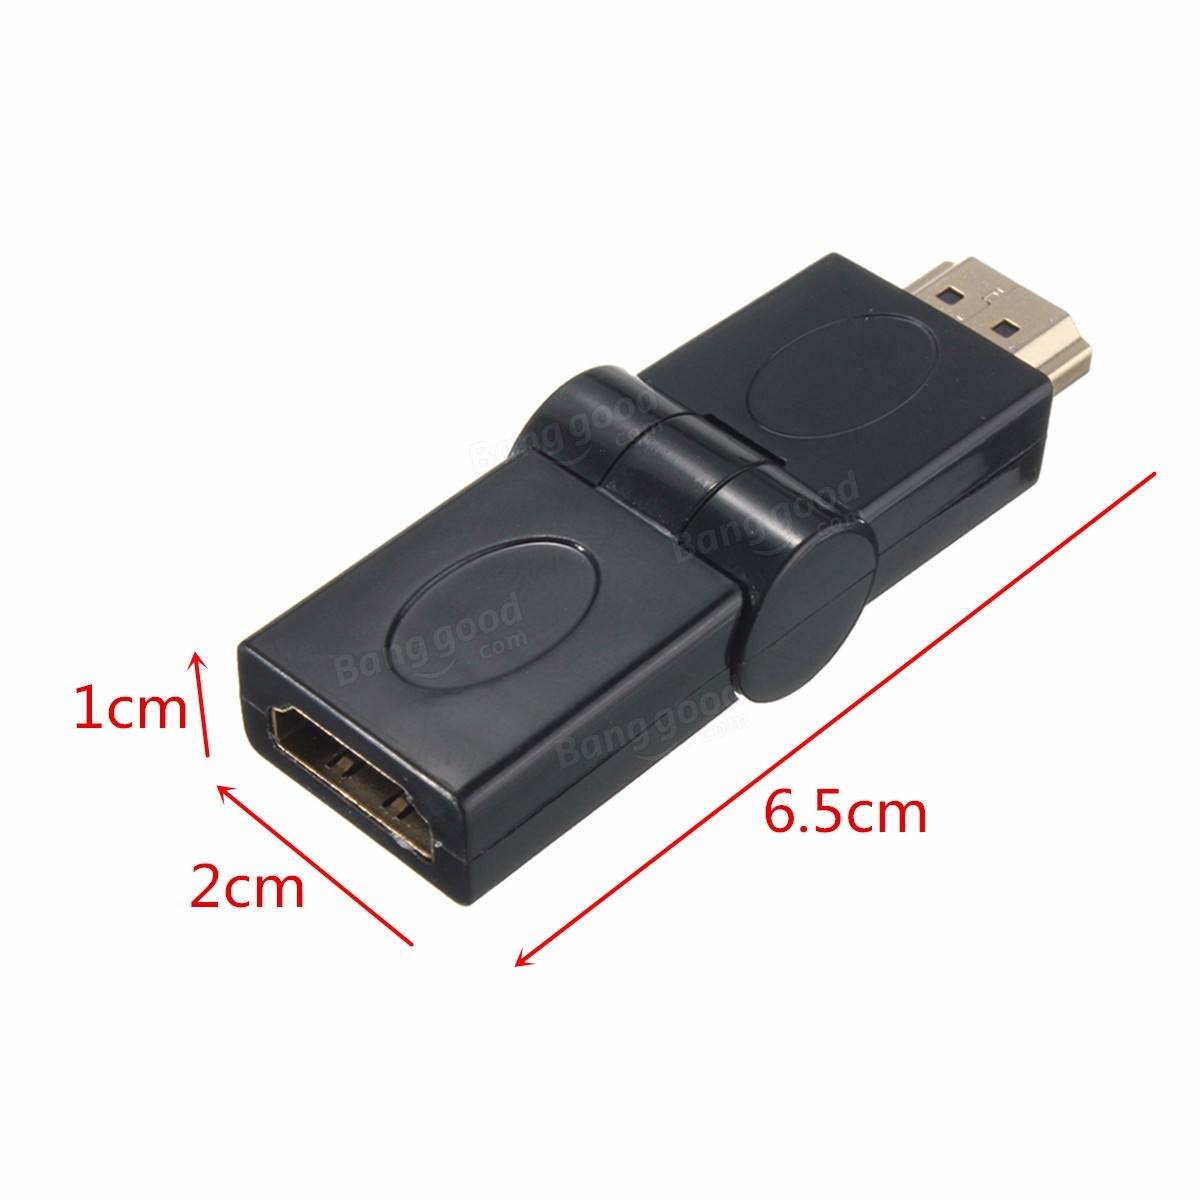 Adjustable Right Angle 90-180 Degree Male To Female HDMI Adapter Convertor